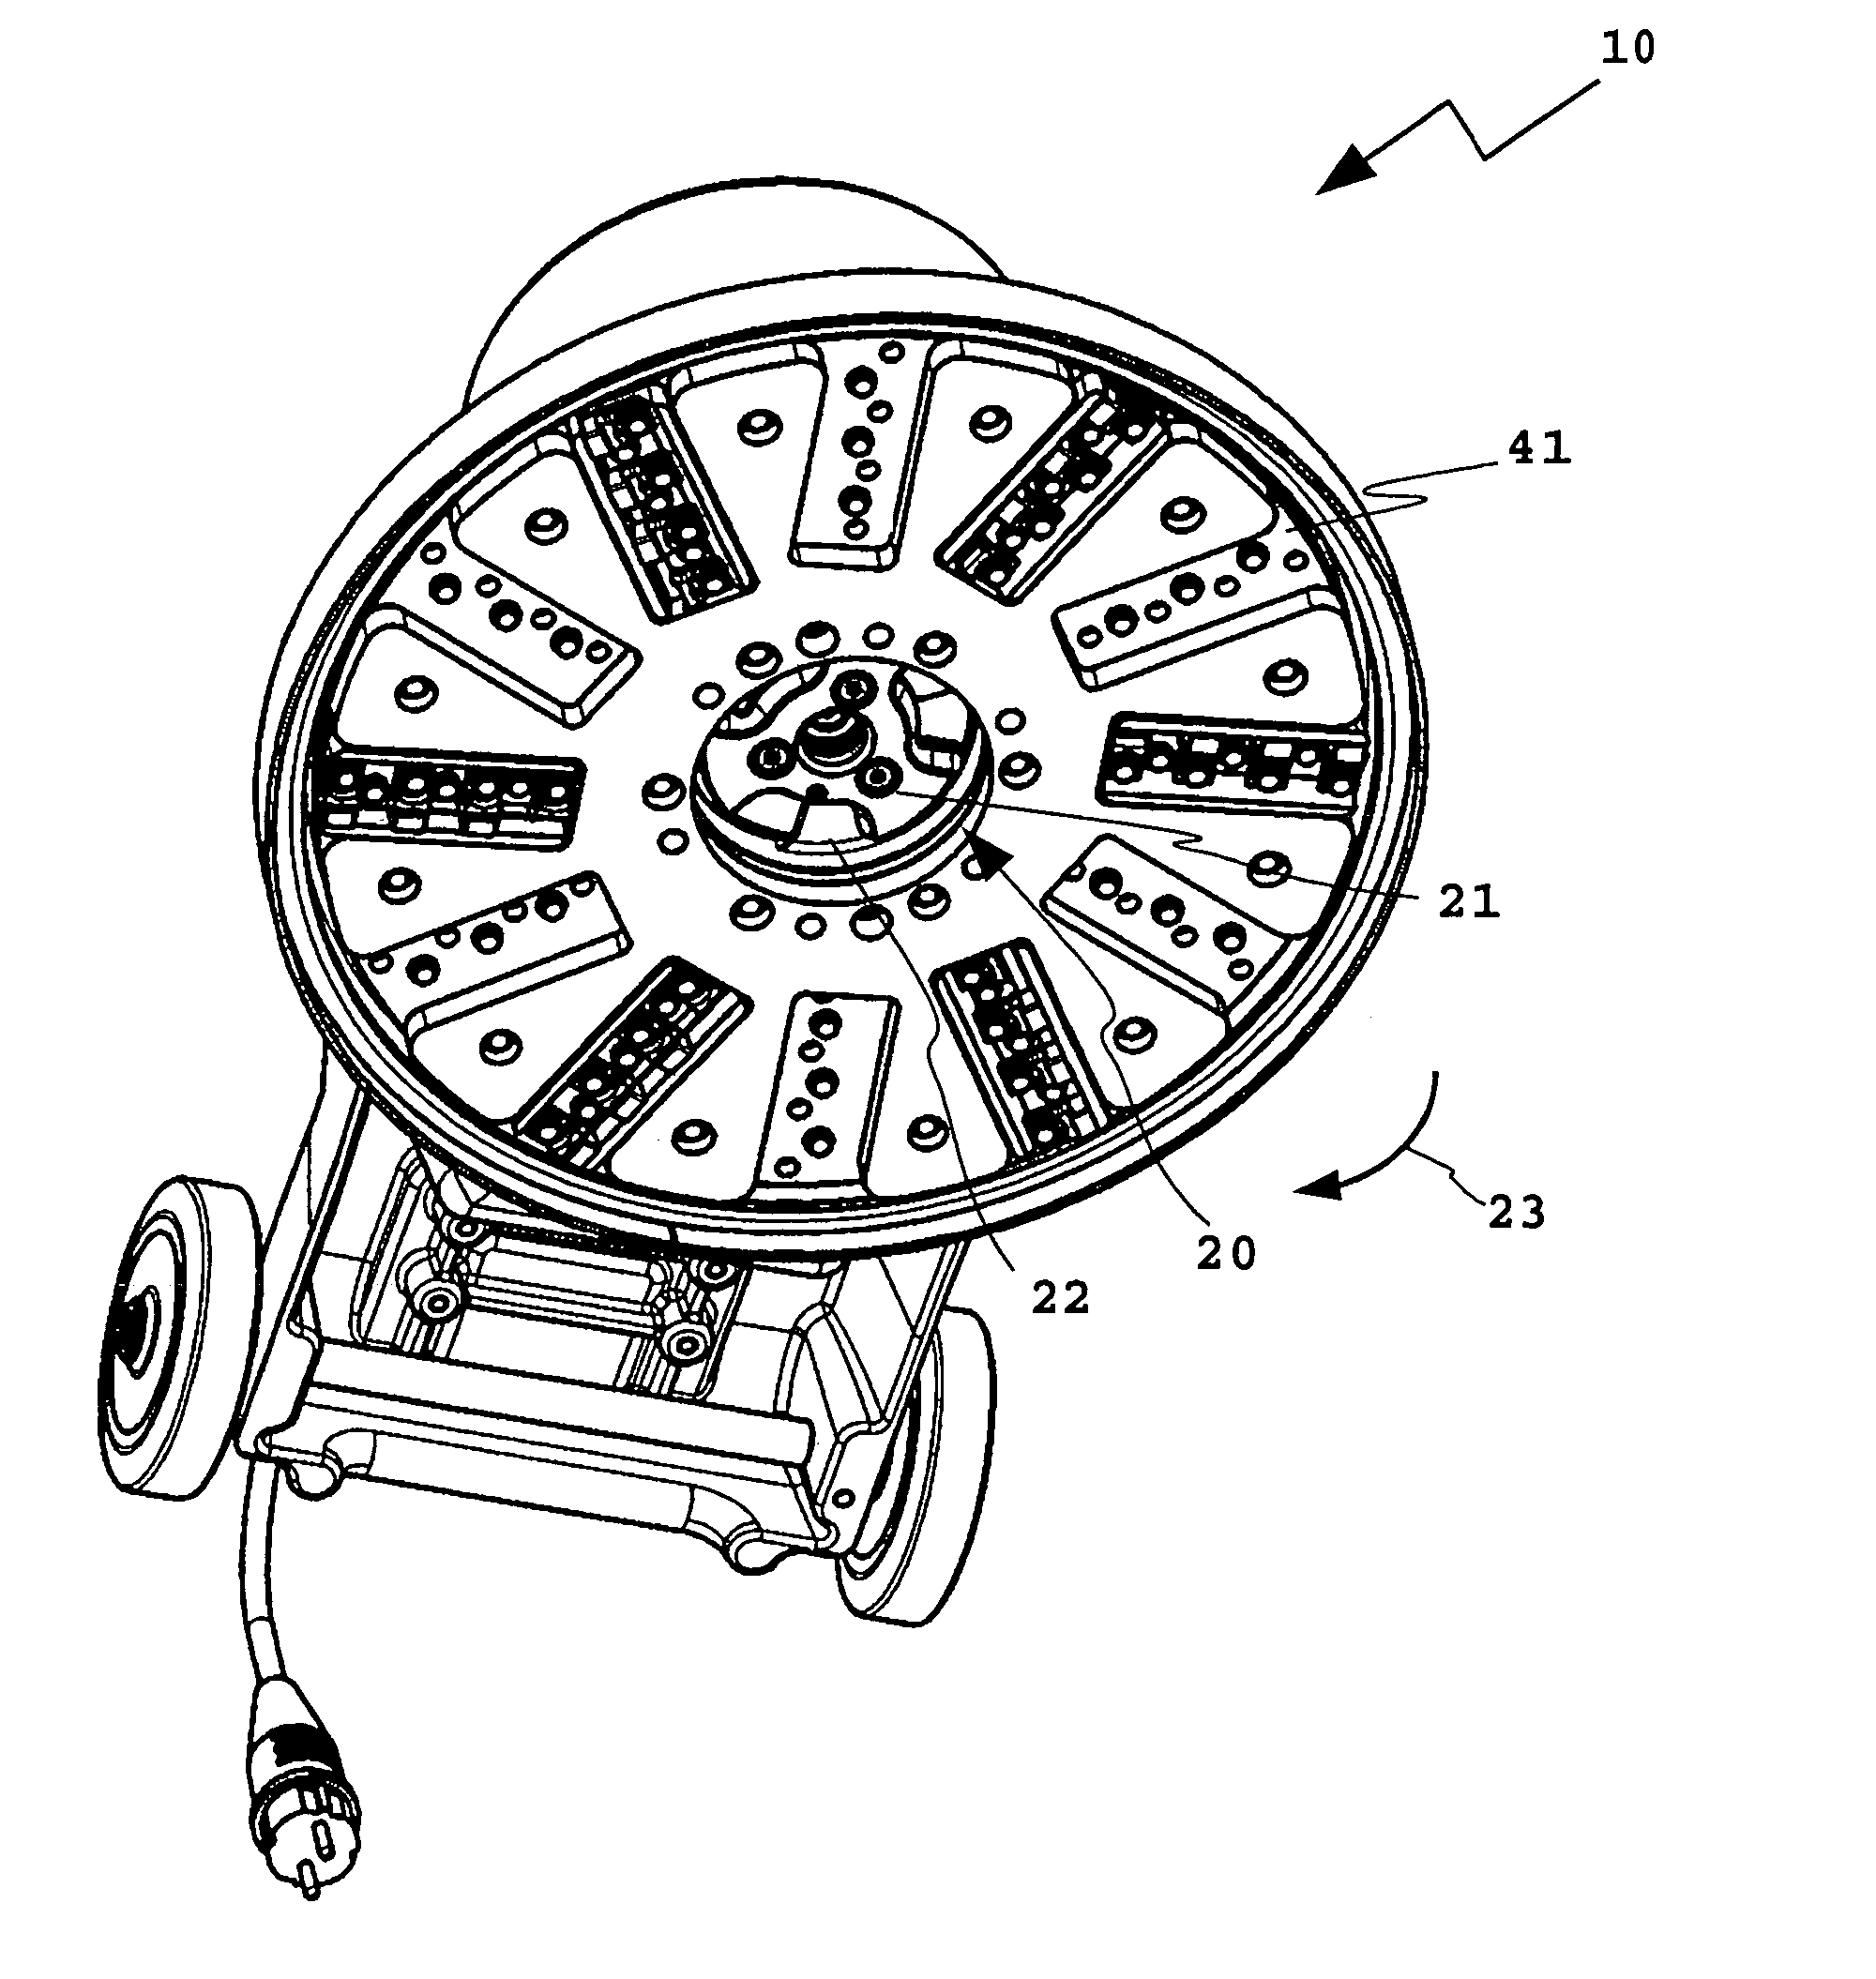 Milling disk for a floor machining appliance